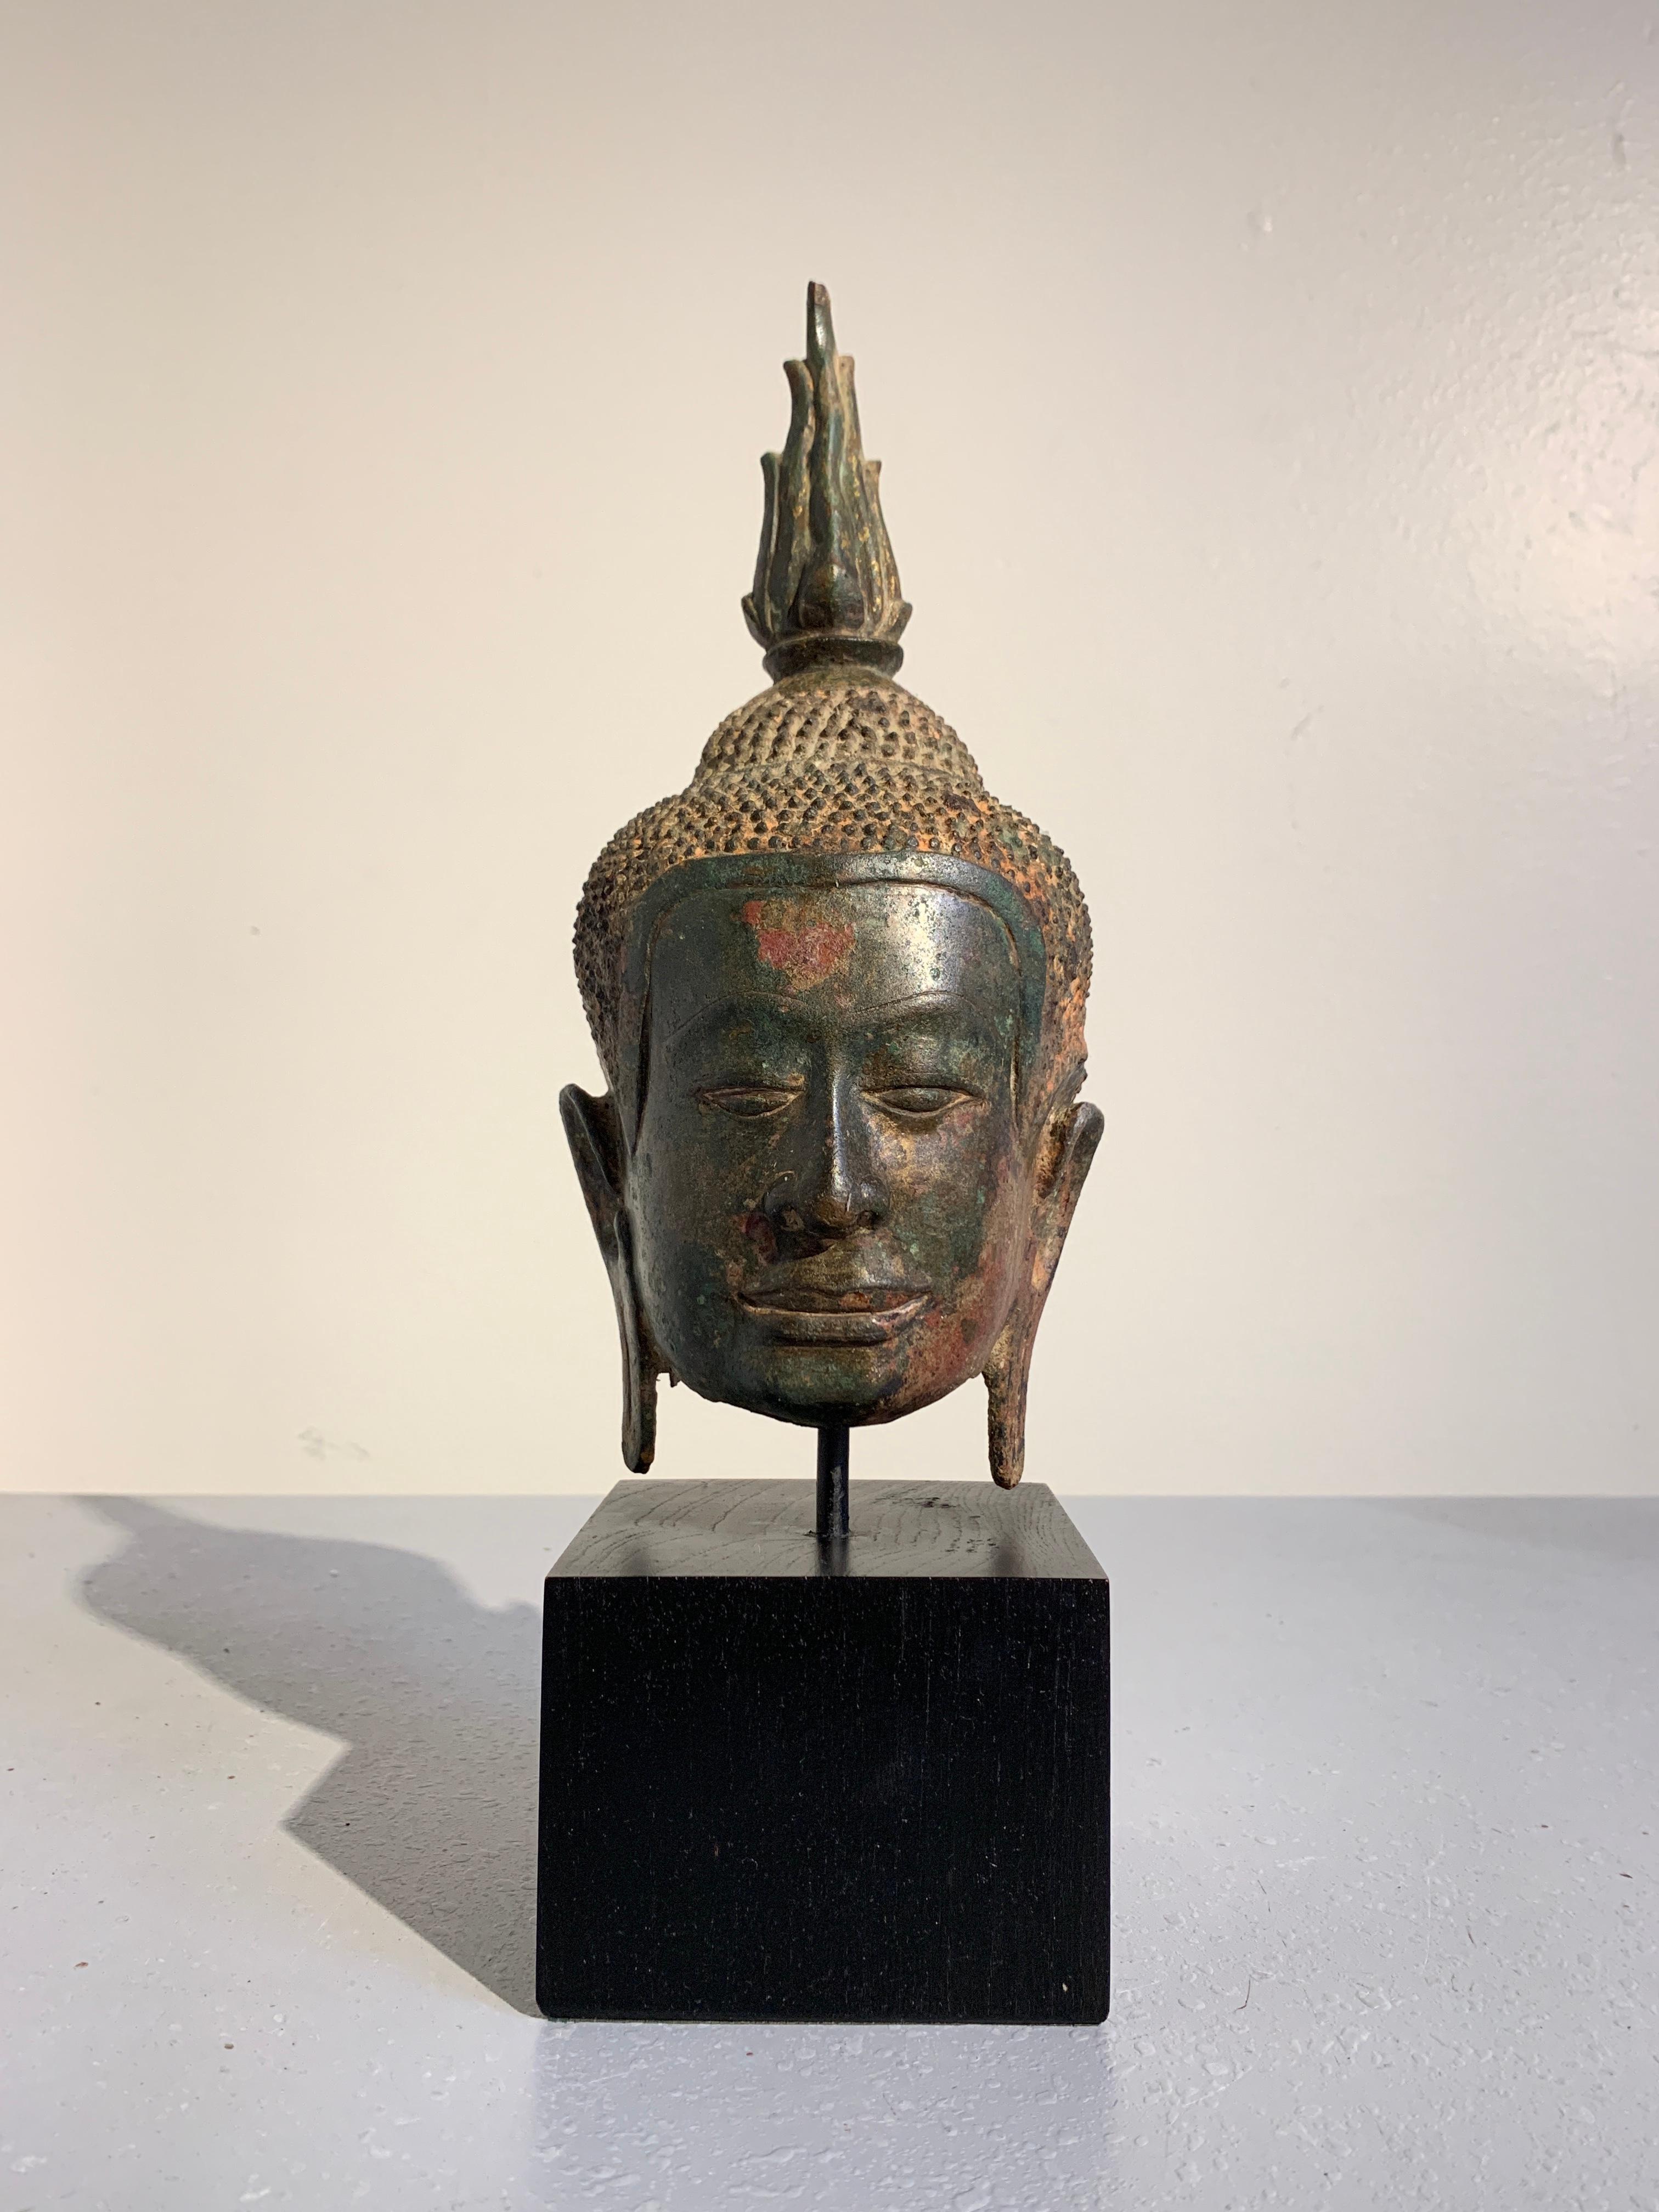 A beautifully patinated bronze Buddha head from the Kingdom of Ayutthaya, Thailand, circa 14th century.

The Buddha's face has a distinct Khmer influence, with a square face and jaw, broad nose, and long straight lips curled up ever so slightly at